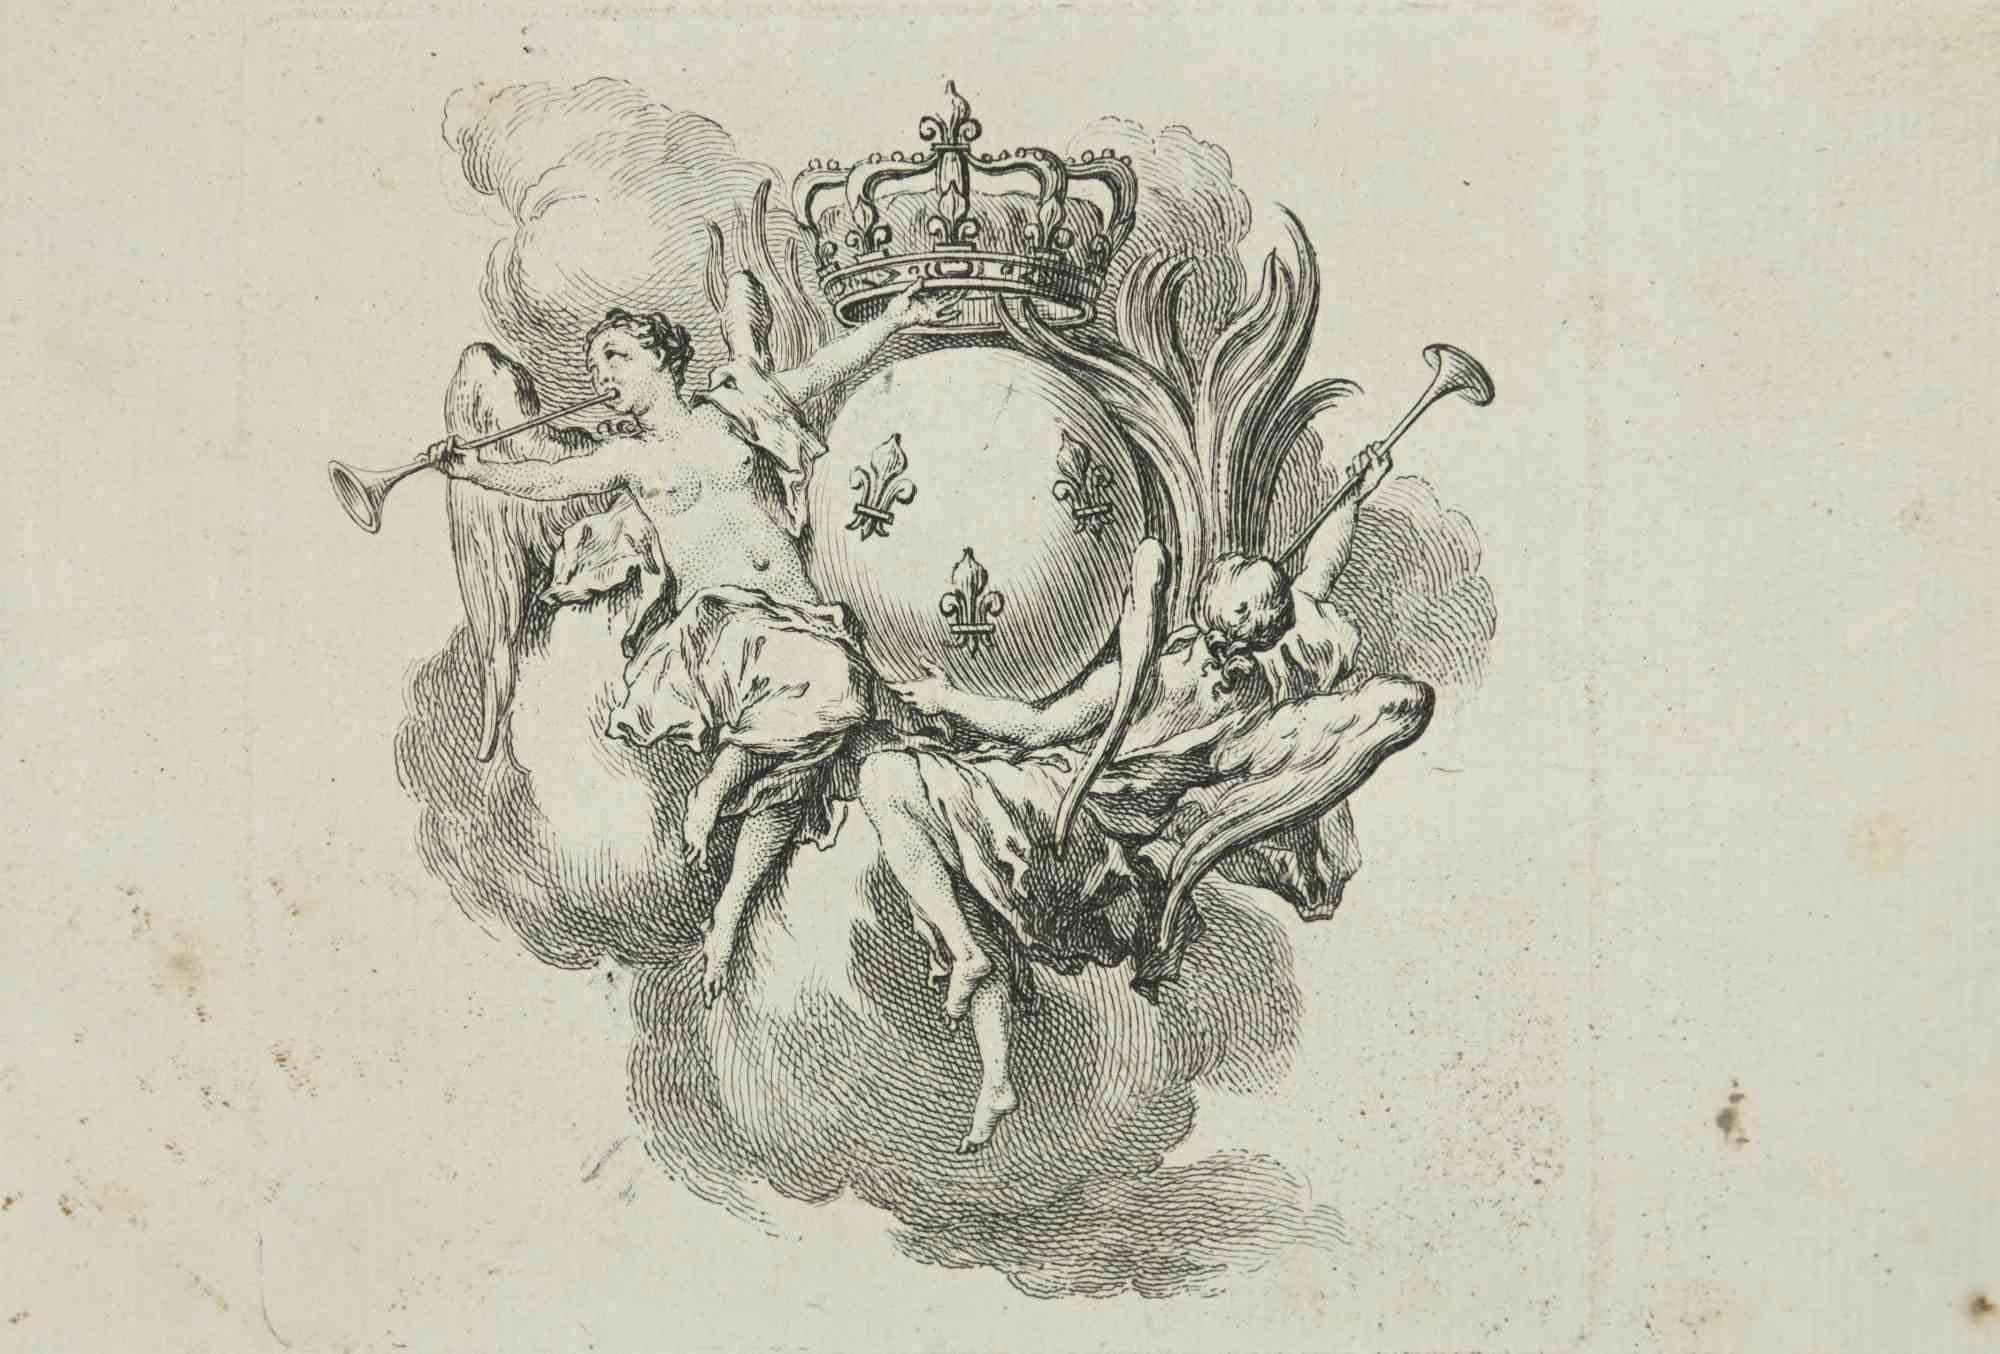 Composition with Angels is an etching realized in 1771 by Louis Legrand (1723-1807).

The Artwork is depicted through confident strokes in aa well balanced composition.

Good conditions.